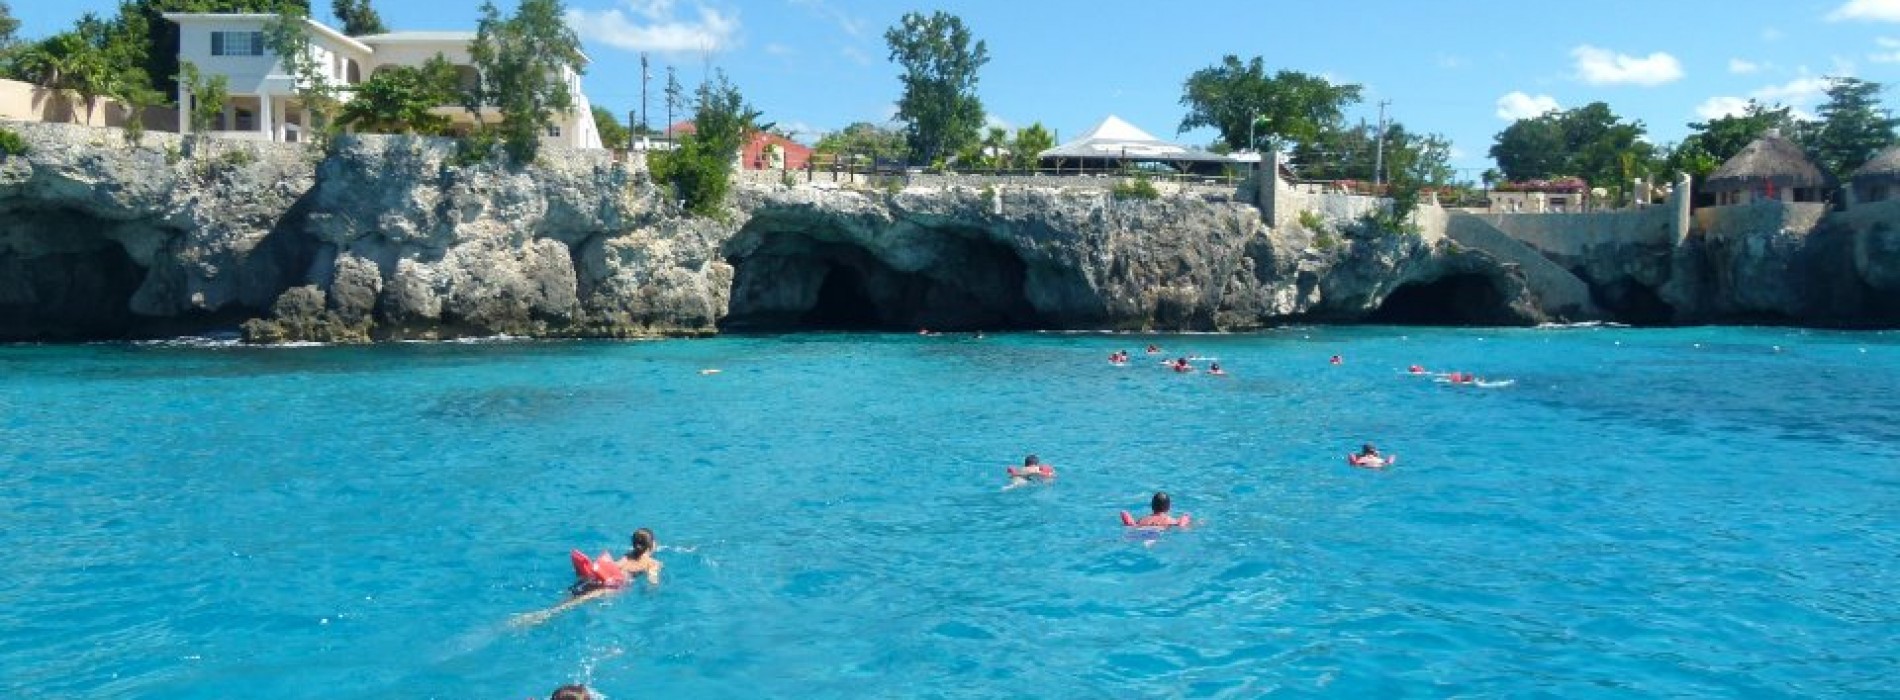 5 must-dos of Negril, Jamaica